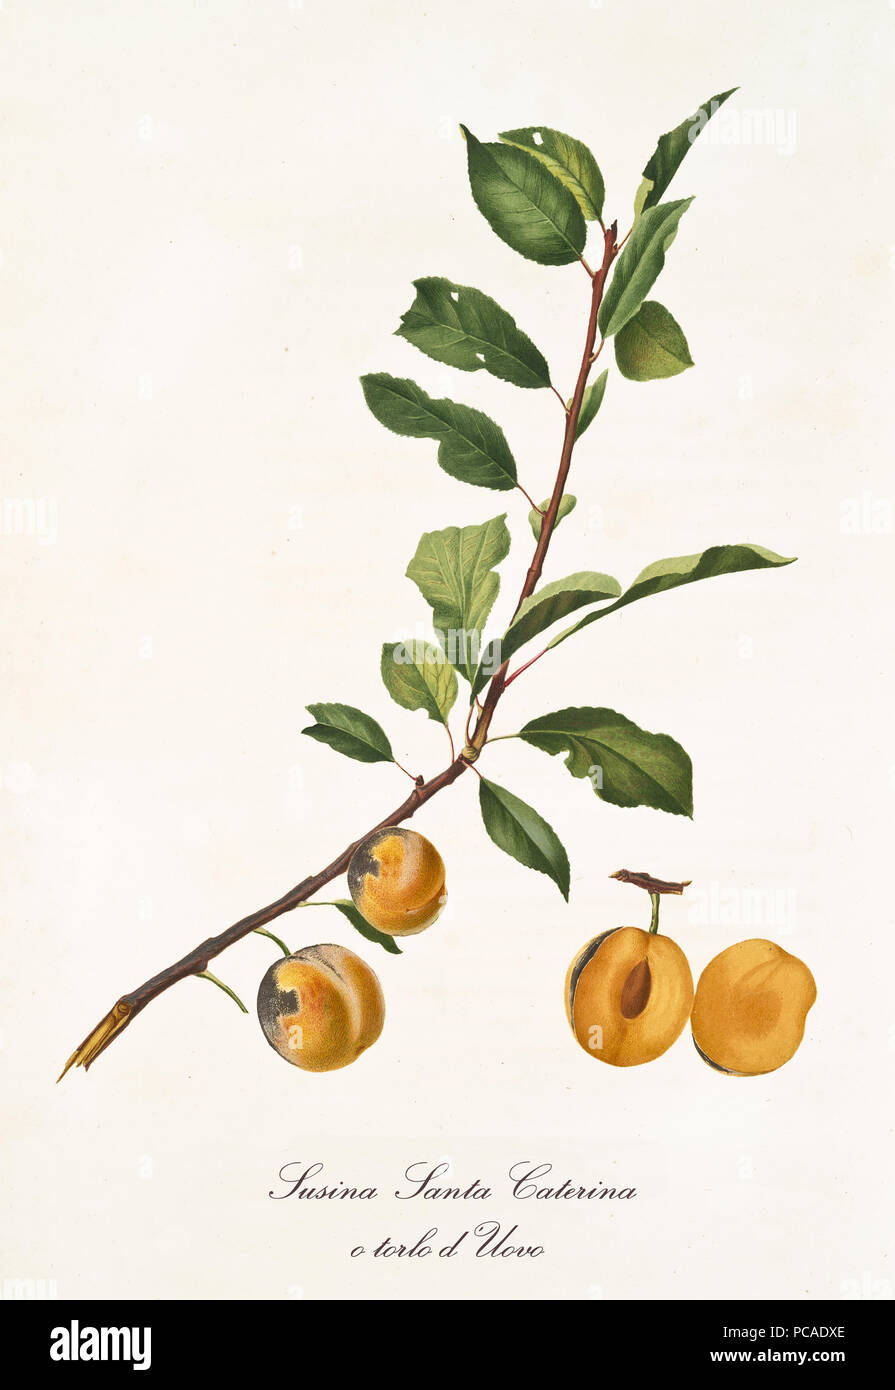 Two yellow plums on branch with leaves and section of the fruit. All the elements are isolated over white background. Old detailed botanical illustration by Giorgio Gallesio published in 1817, 1839 Stock Photo